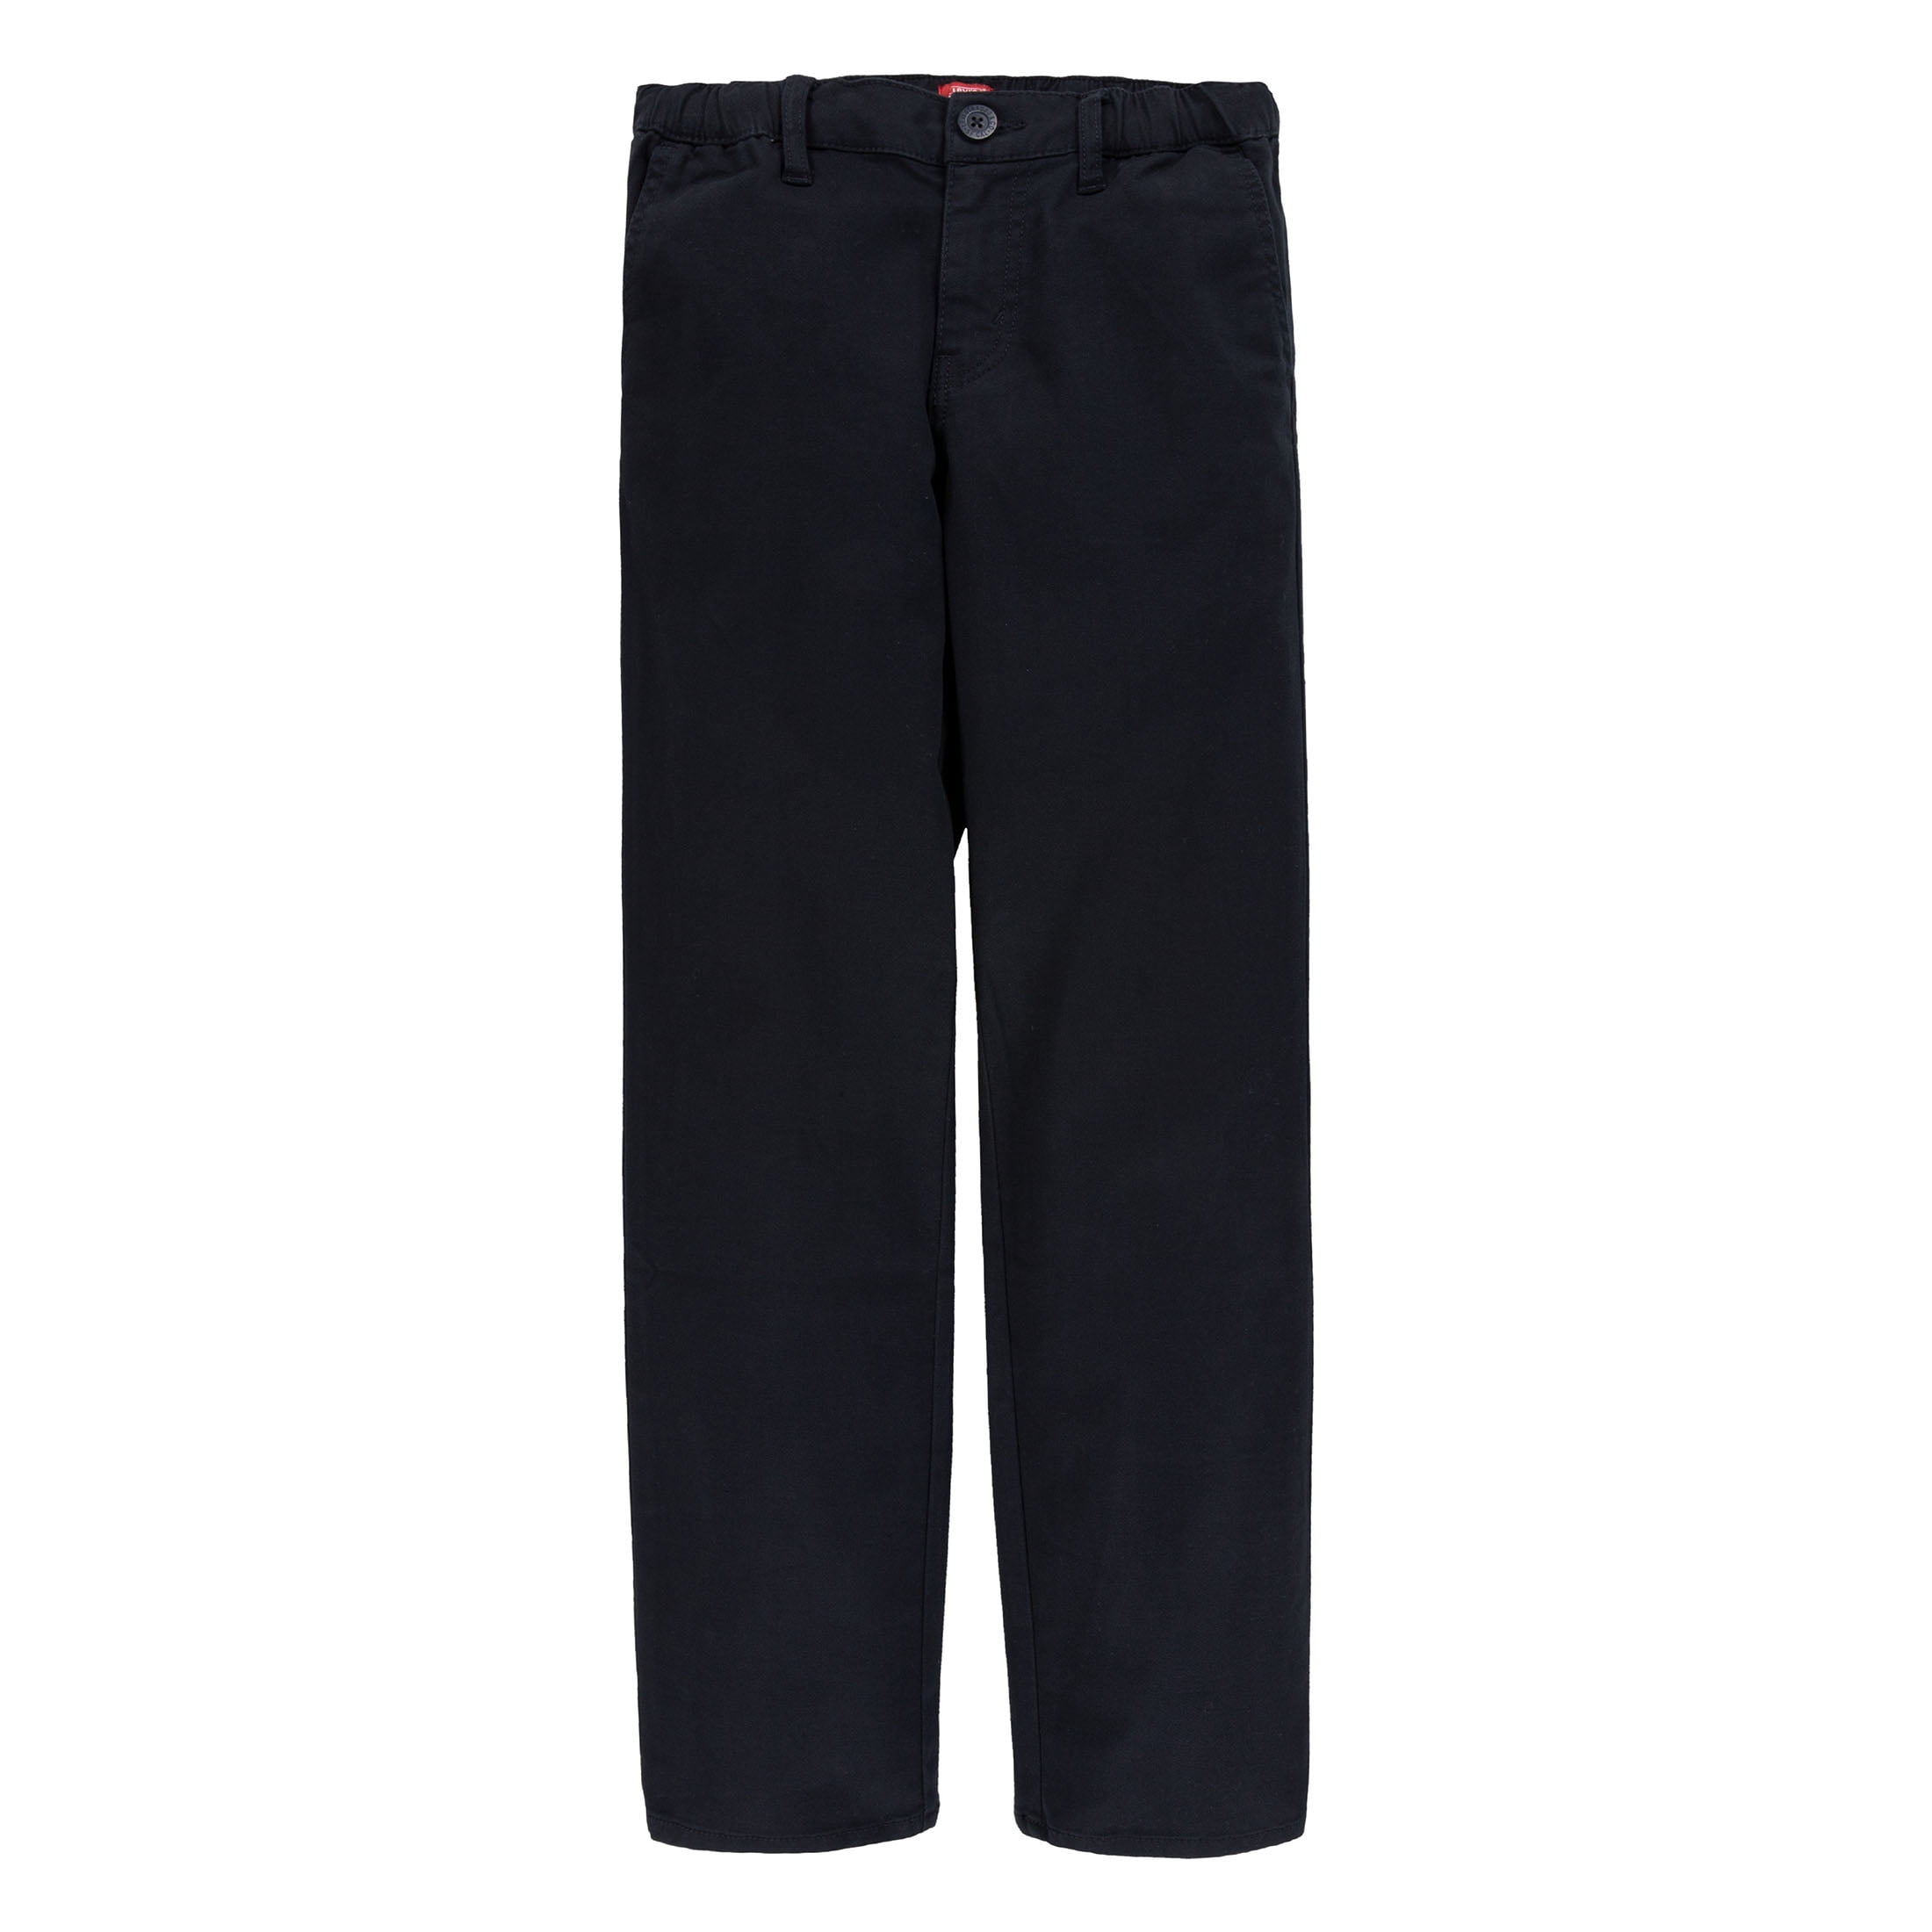 Boys Kids Pull Up Teflon School Formal Trousers Ages 3-7 Years Schoolwear Kids Black Grey Charcoal Navy Half Elastic Waist for Comfort and Ease Slip On 